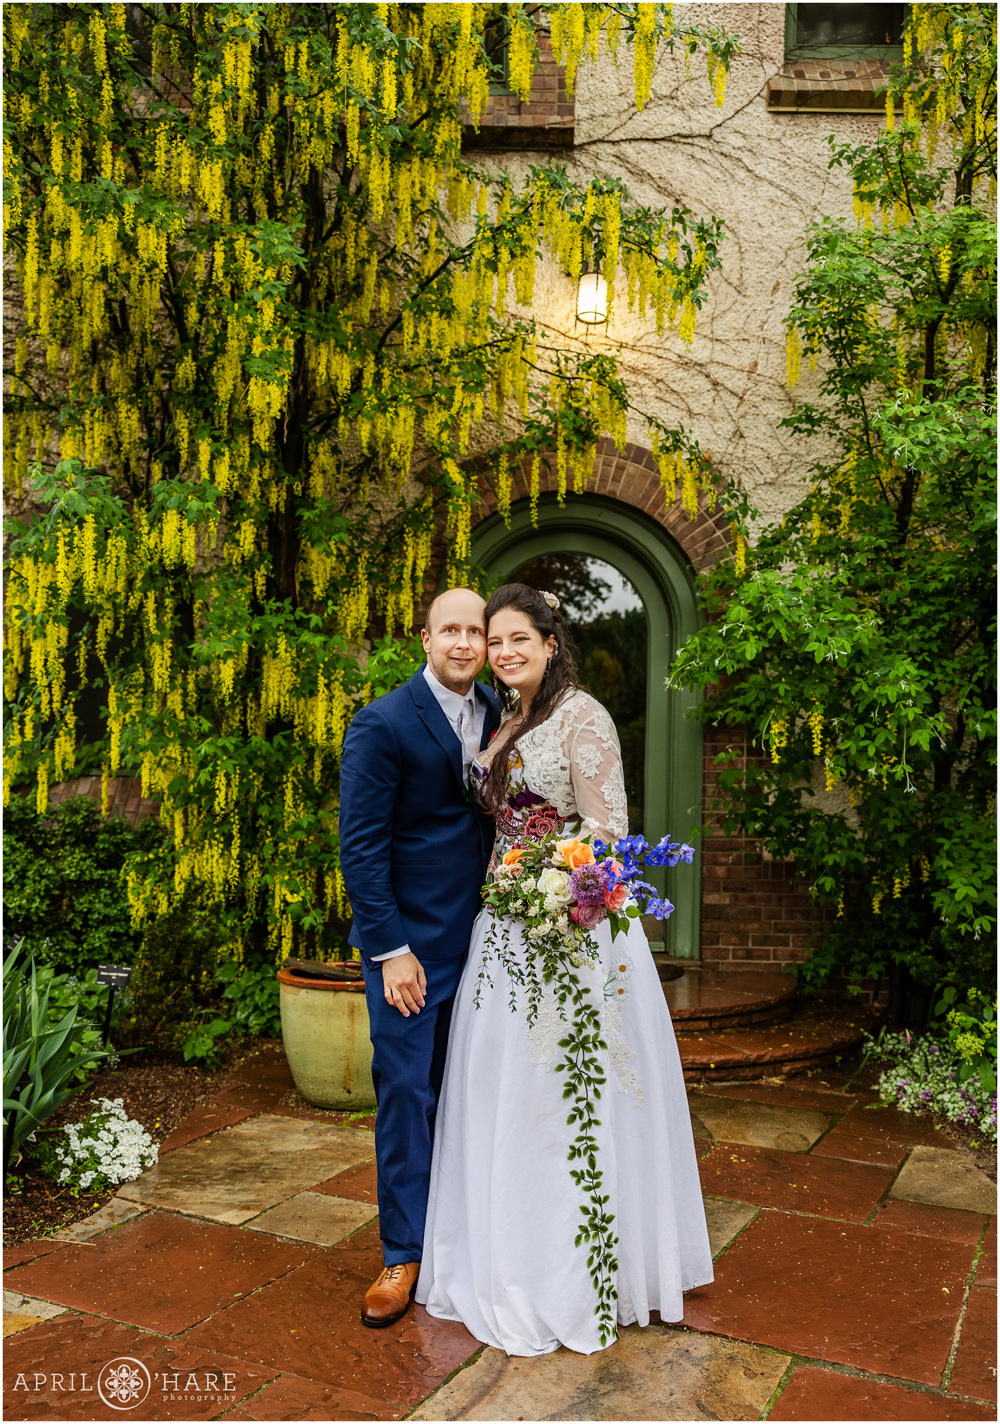 Pretty yellow drooping flowers on a tree in the backdrop for bride and groom portrait in the courtyard outside of the Richard Crawford Campbell House at Denver Botanic Gardens